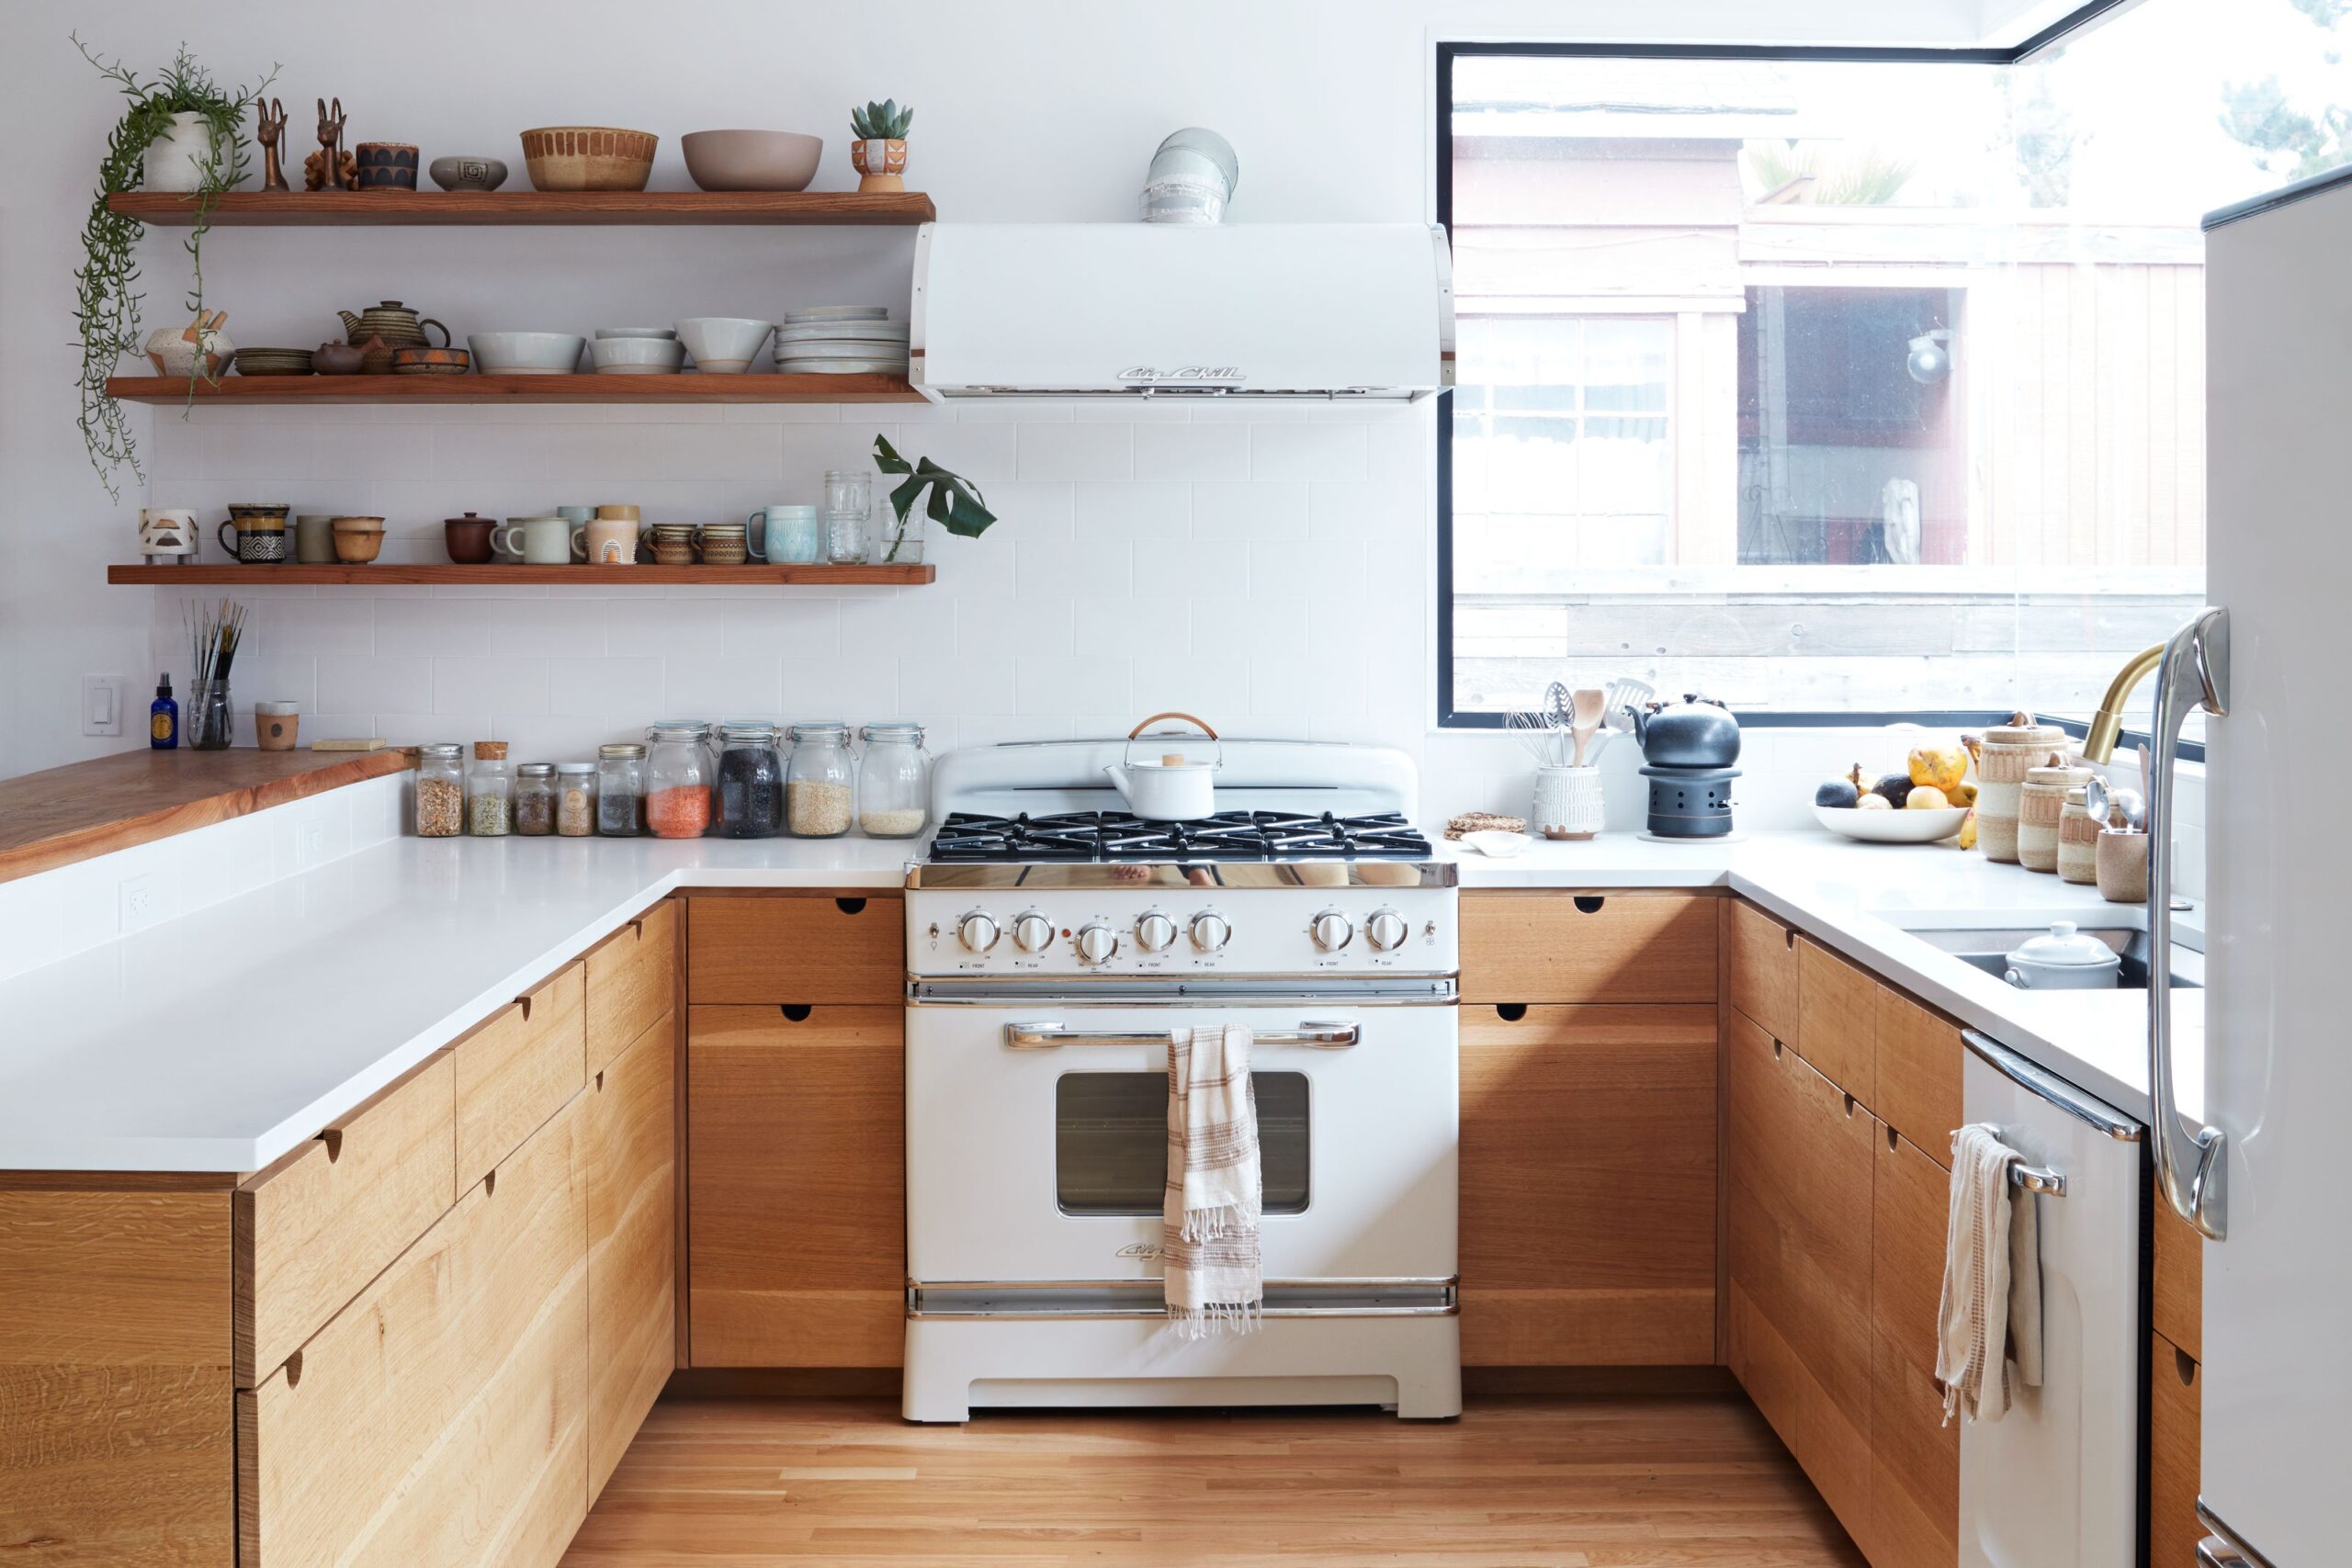 Why rent to buy appliances May Be The Best Option For Your Home Appliances